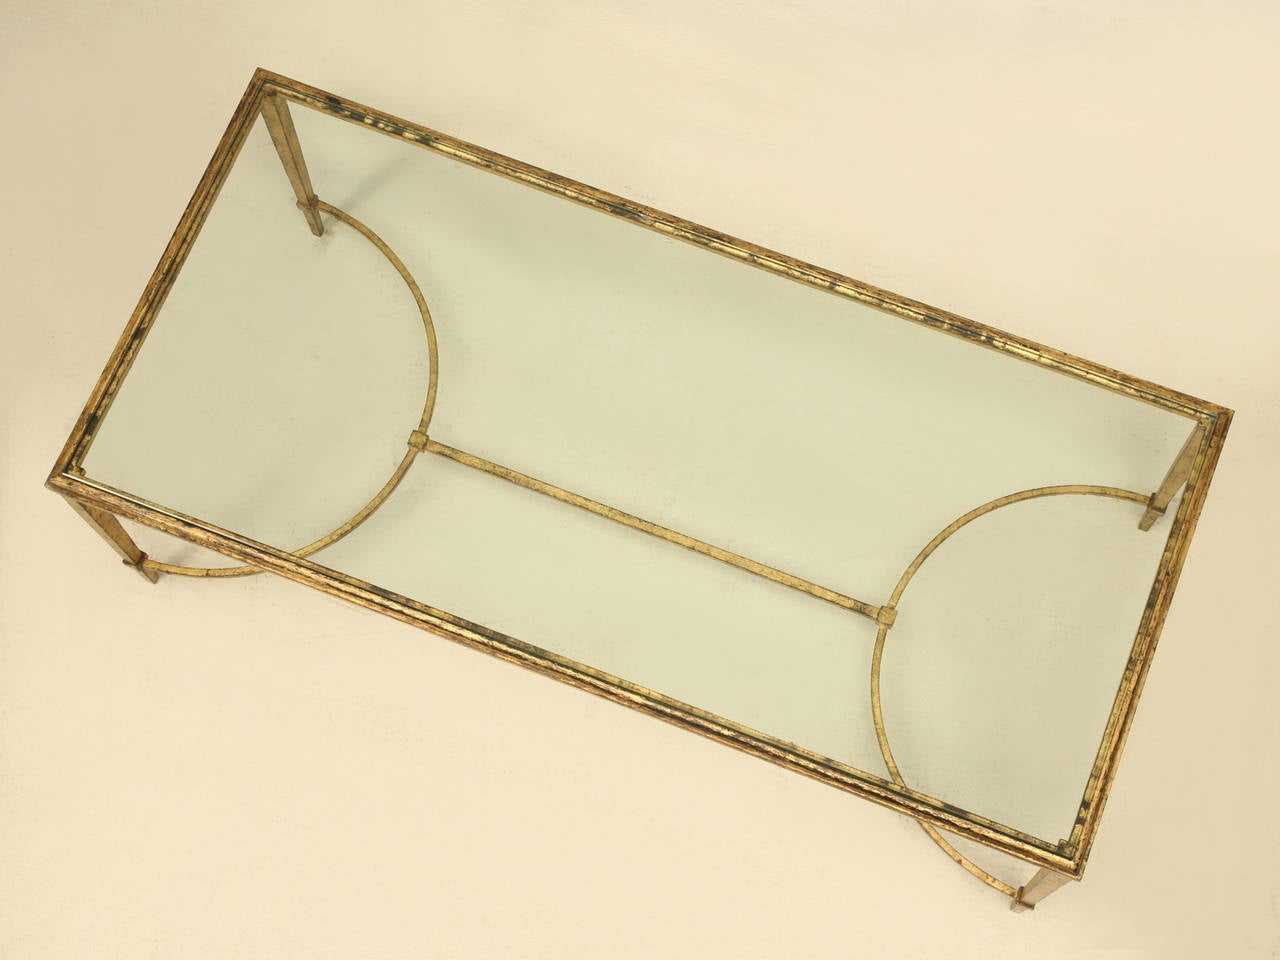 French Mid-Century Modern coffee table in the manner of Maison Ramsay and probably made in the late 1940s. Doré gilt metal with tapered legs and a thin stretcher connecting the legs with a beveled glass top. Simply elegant in its execution and